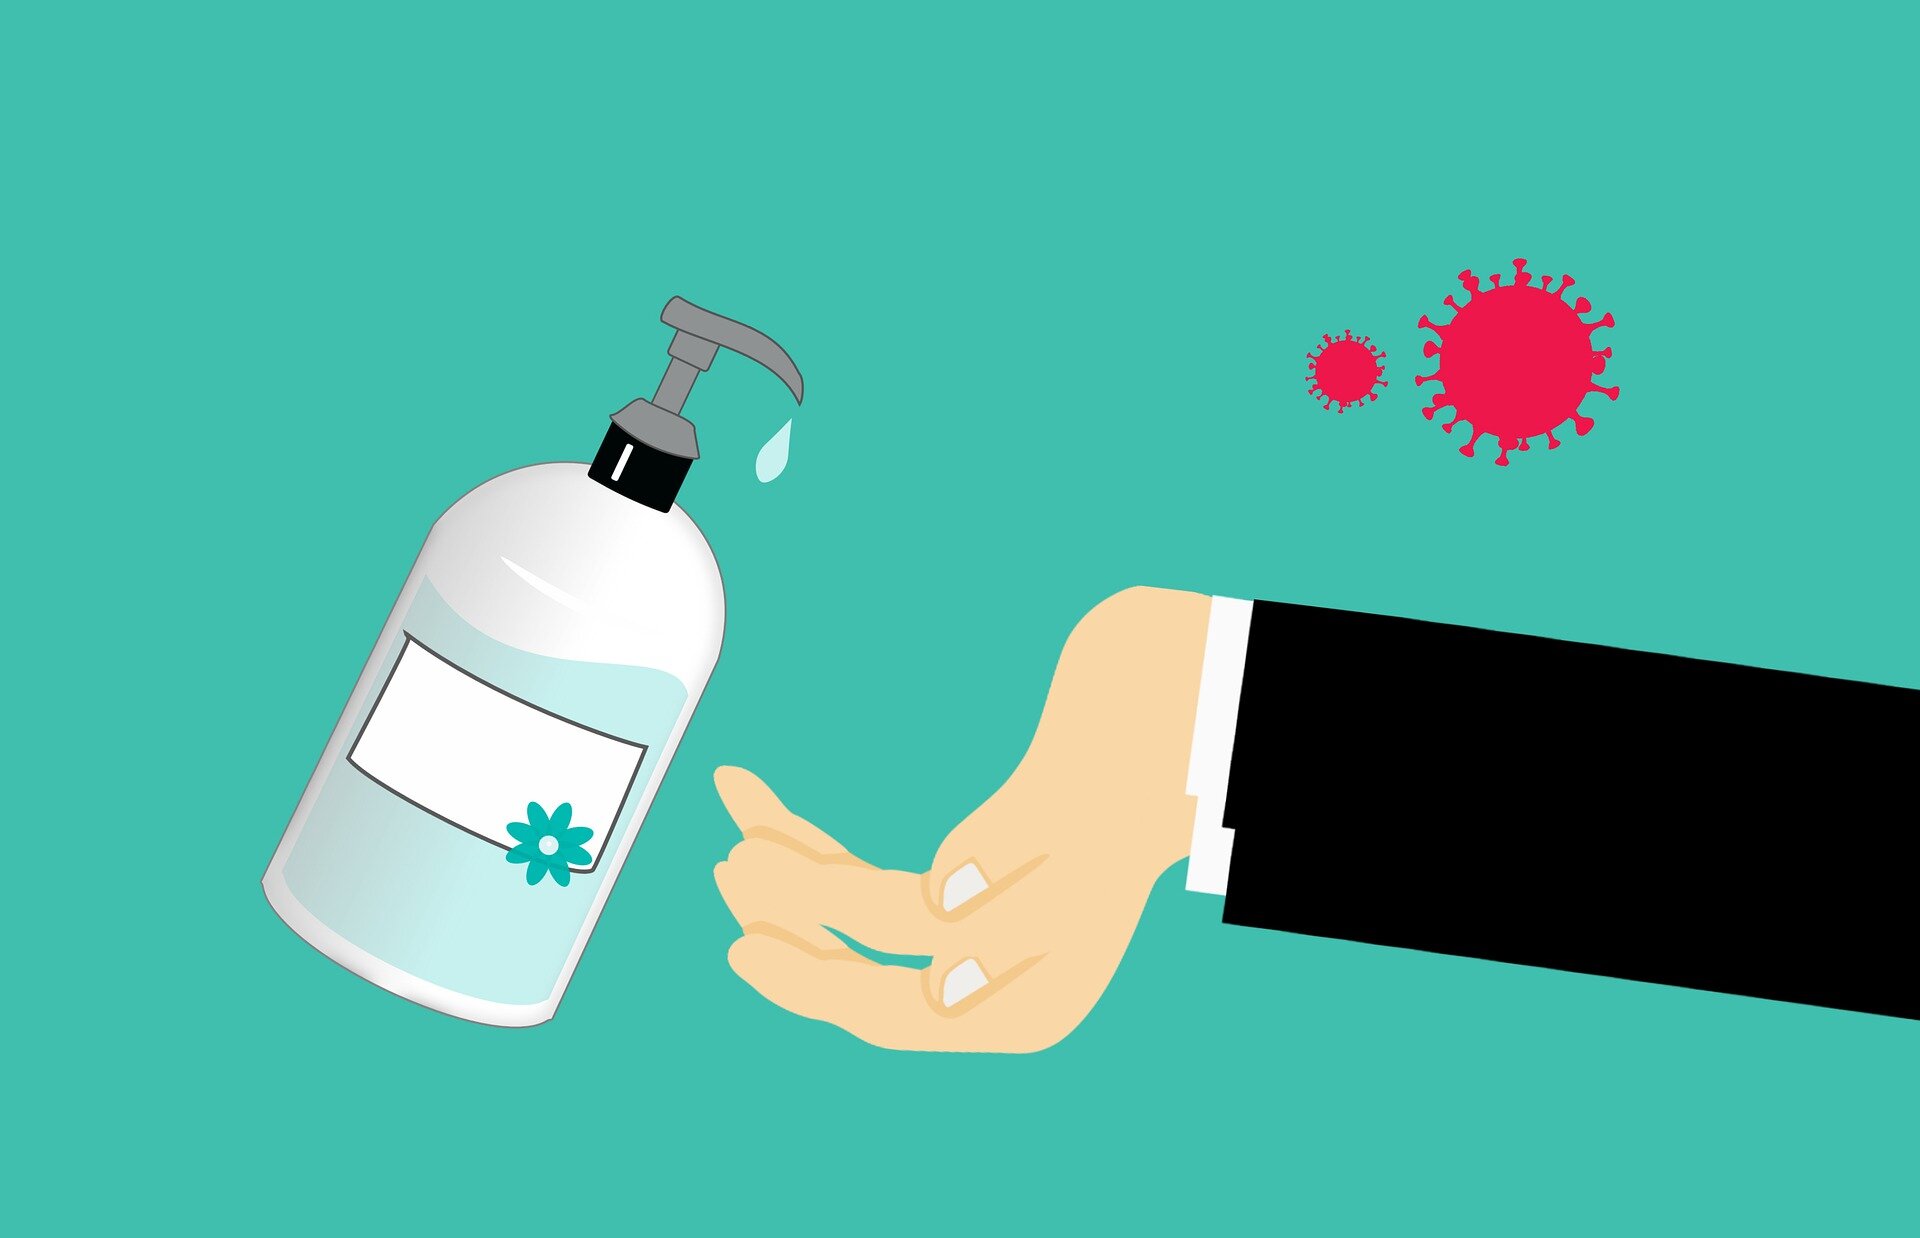 How To Make Your Own Hand Sanitizer At Home